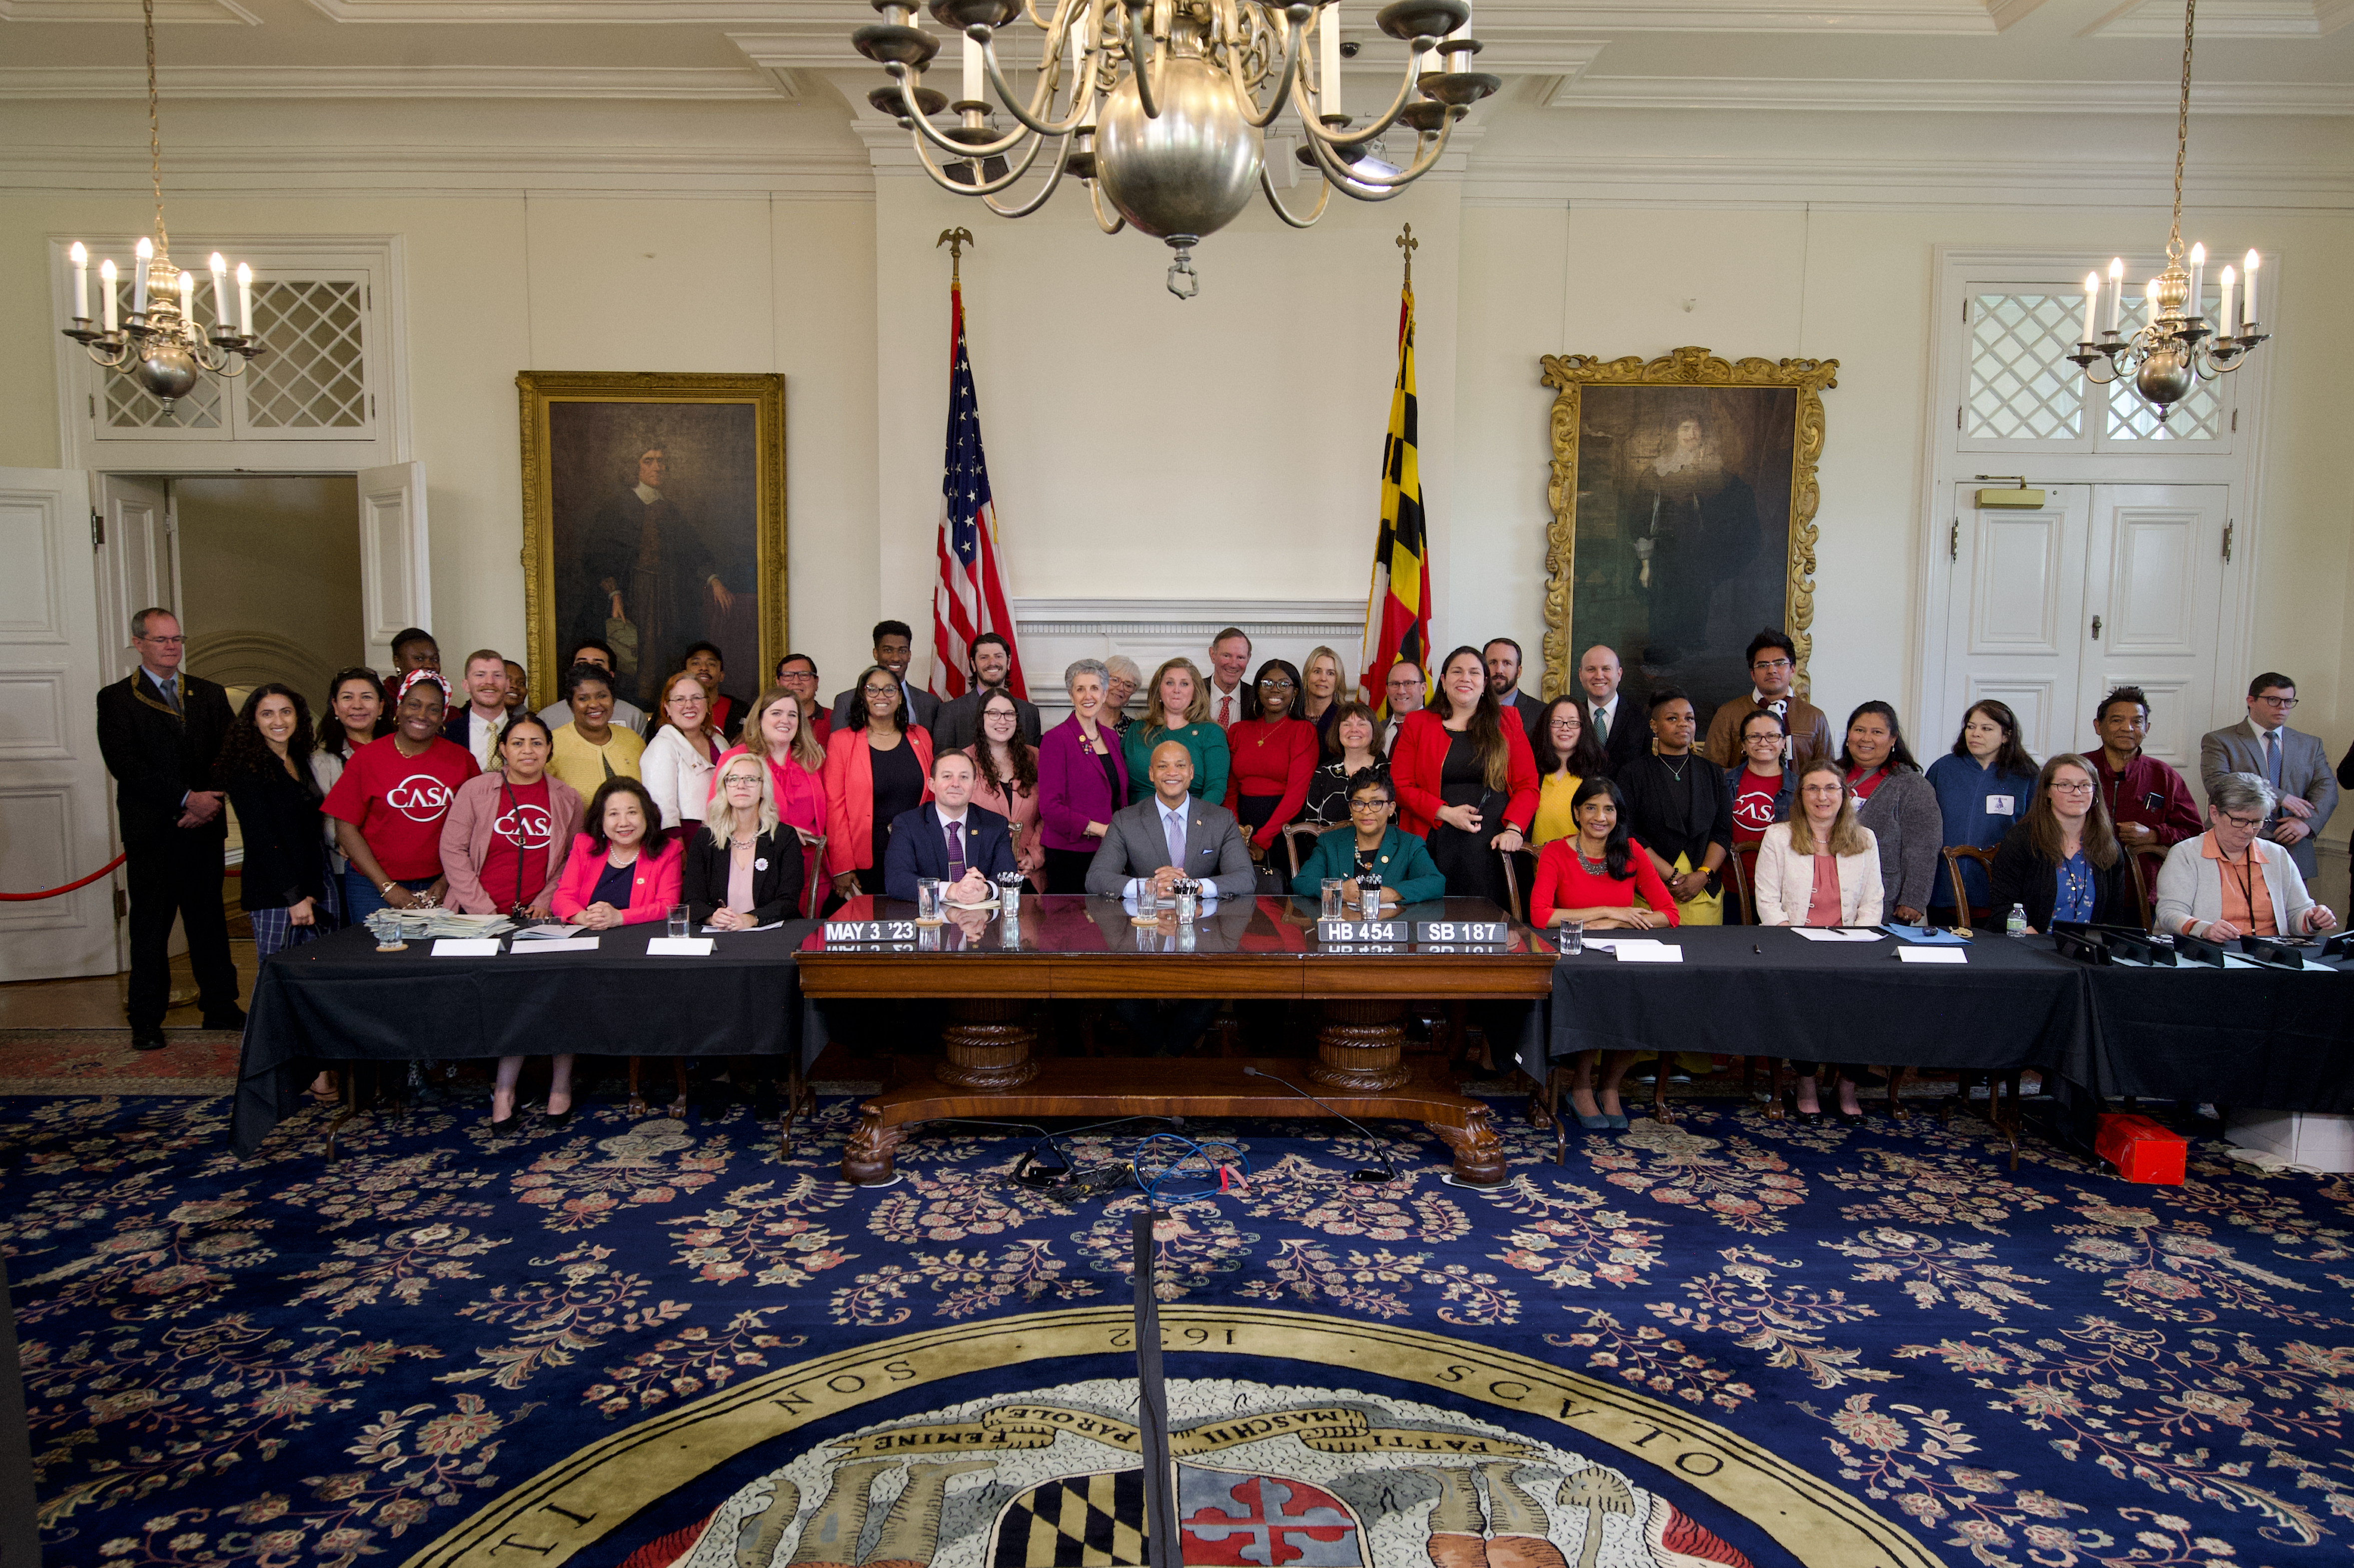 group photo at bill signing at Maryland State House with legislators, governor and others